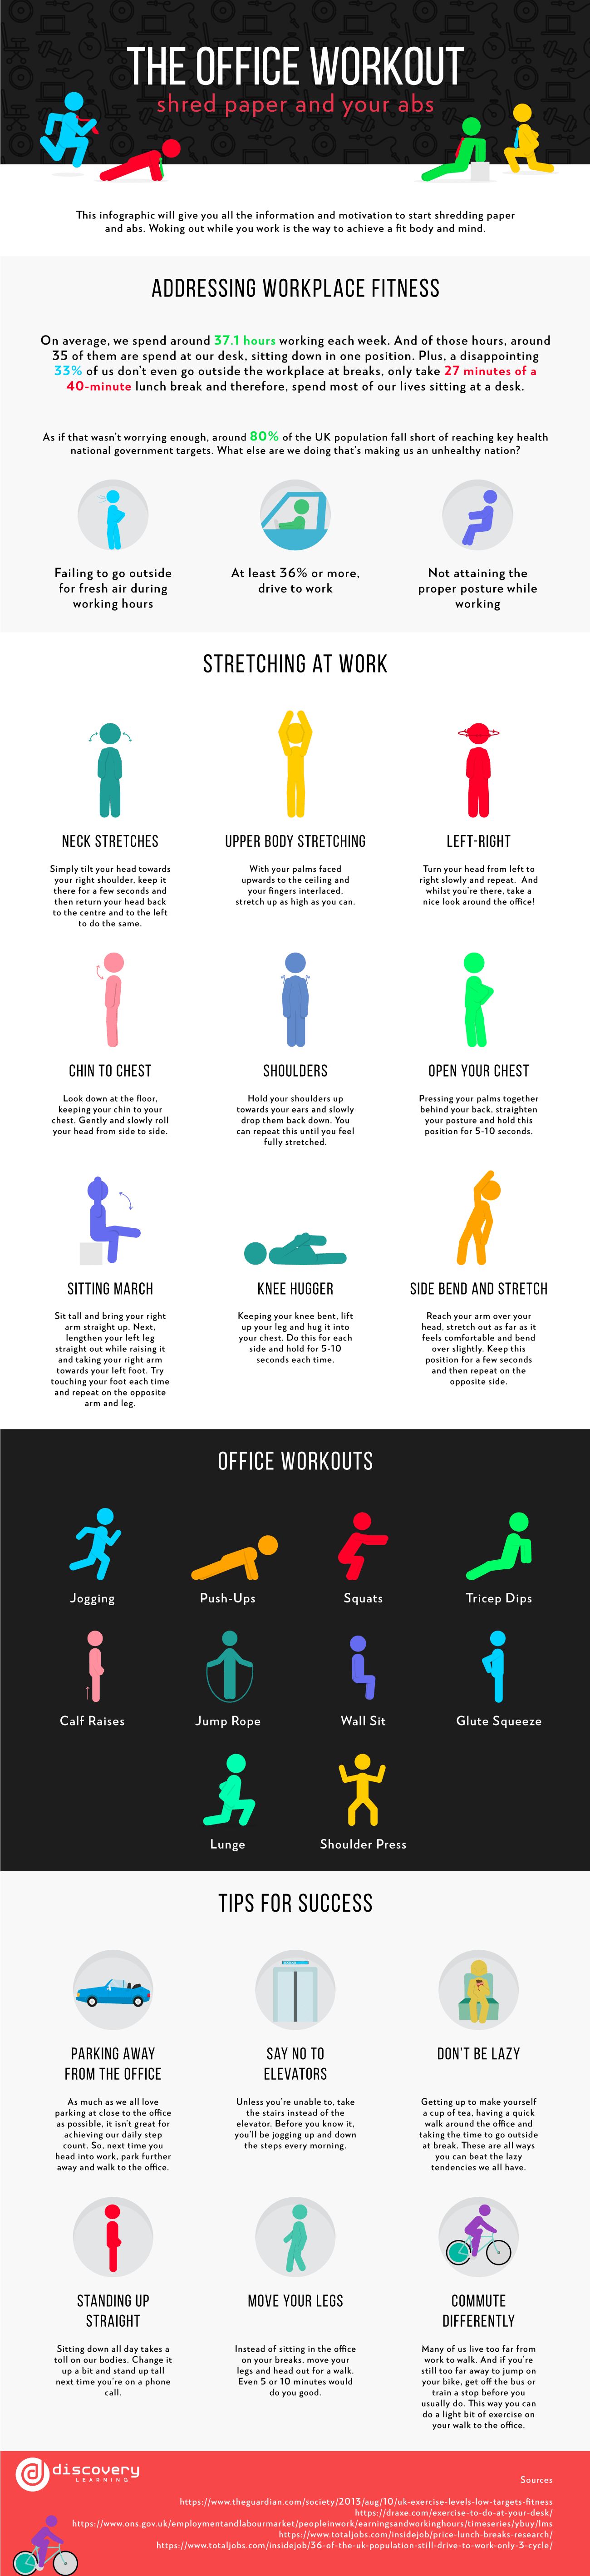 The Office Workout 